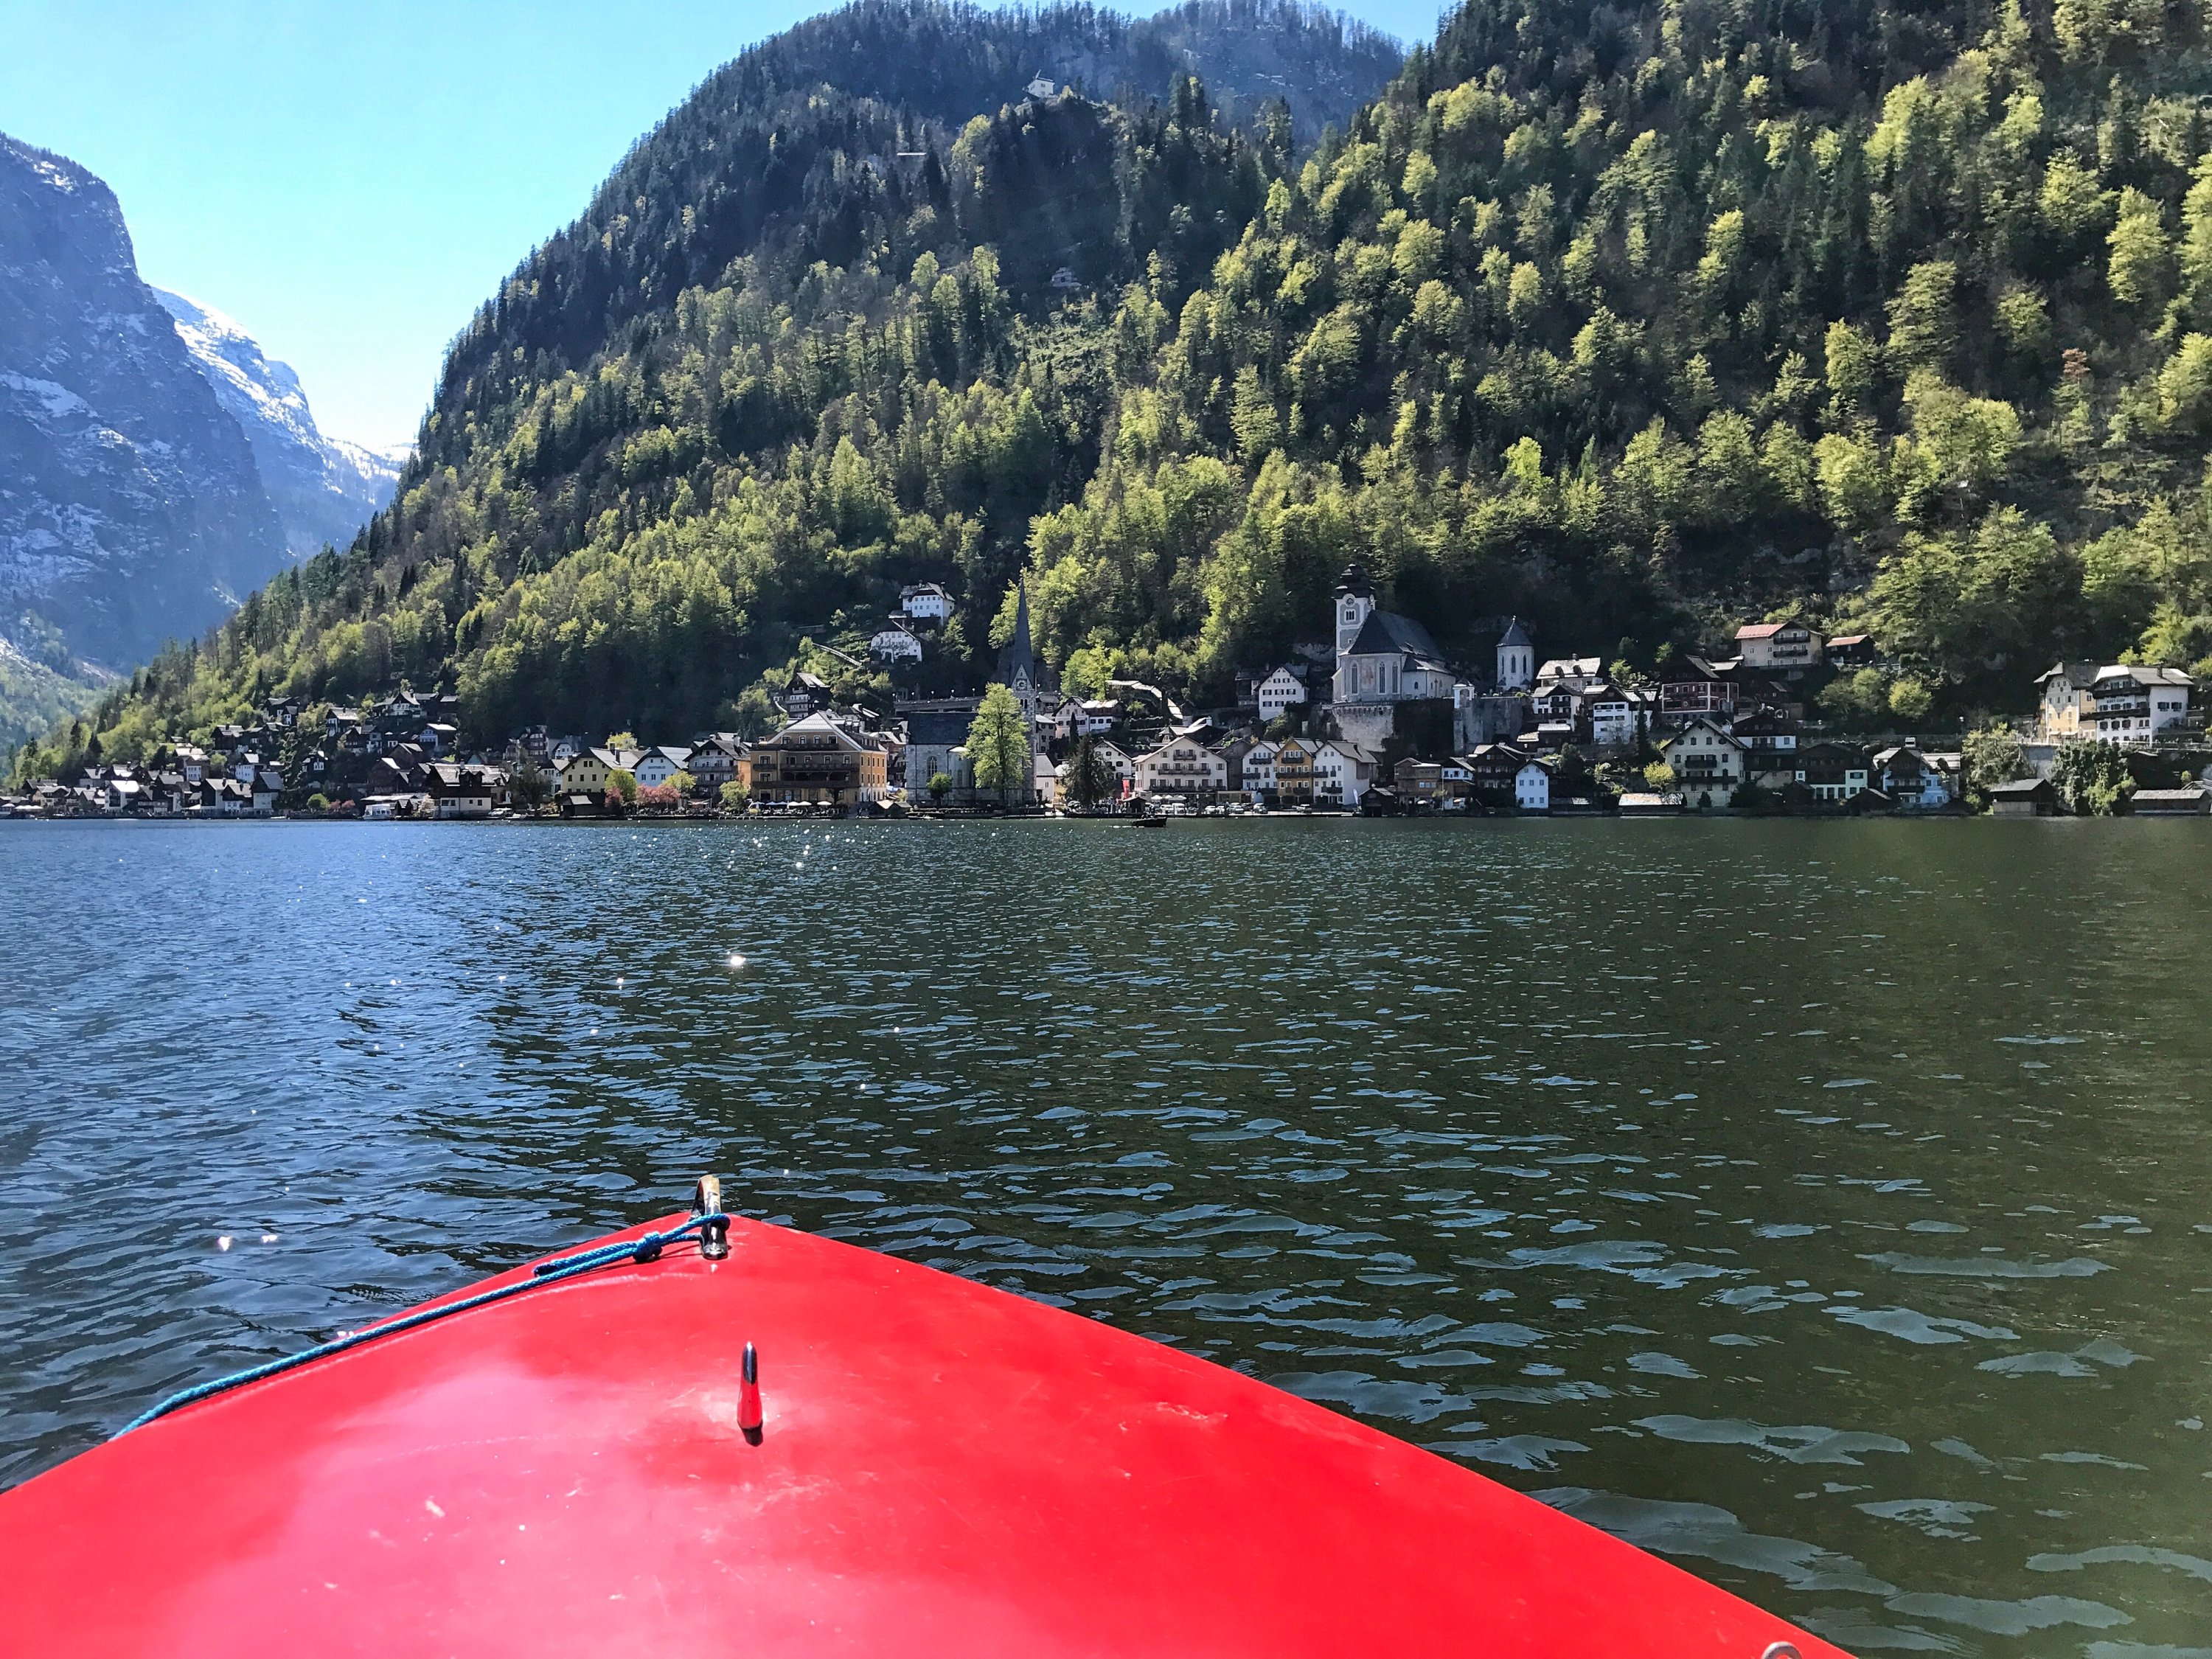 A view of the lake, the village and the Alps from a boat, in Hallstatt, Austria. (Photo by Özge Şengelen)